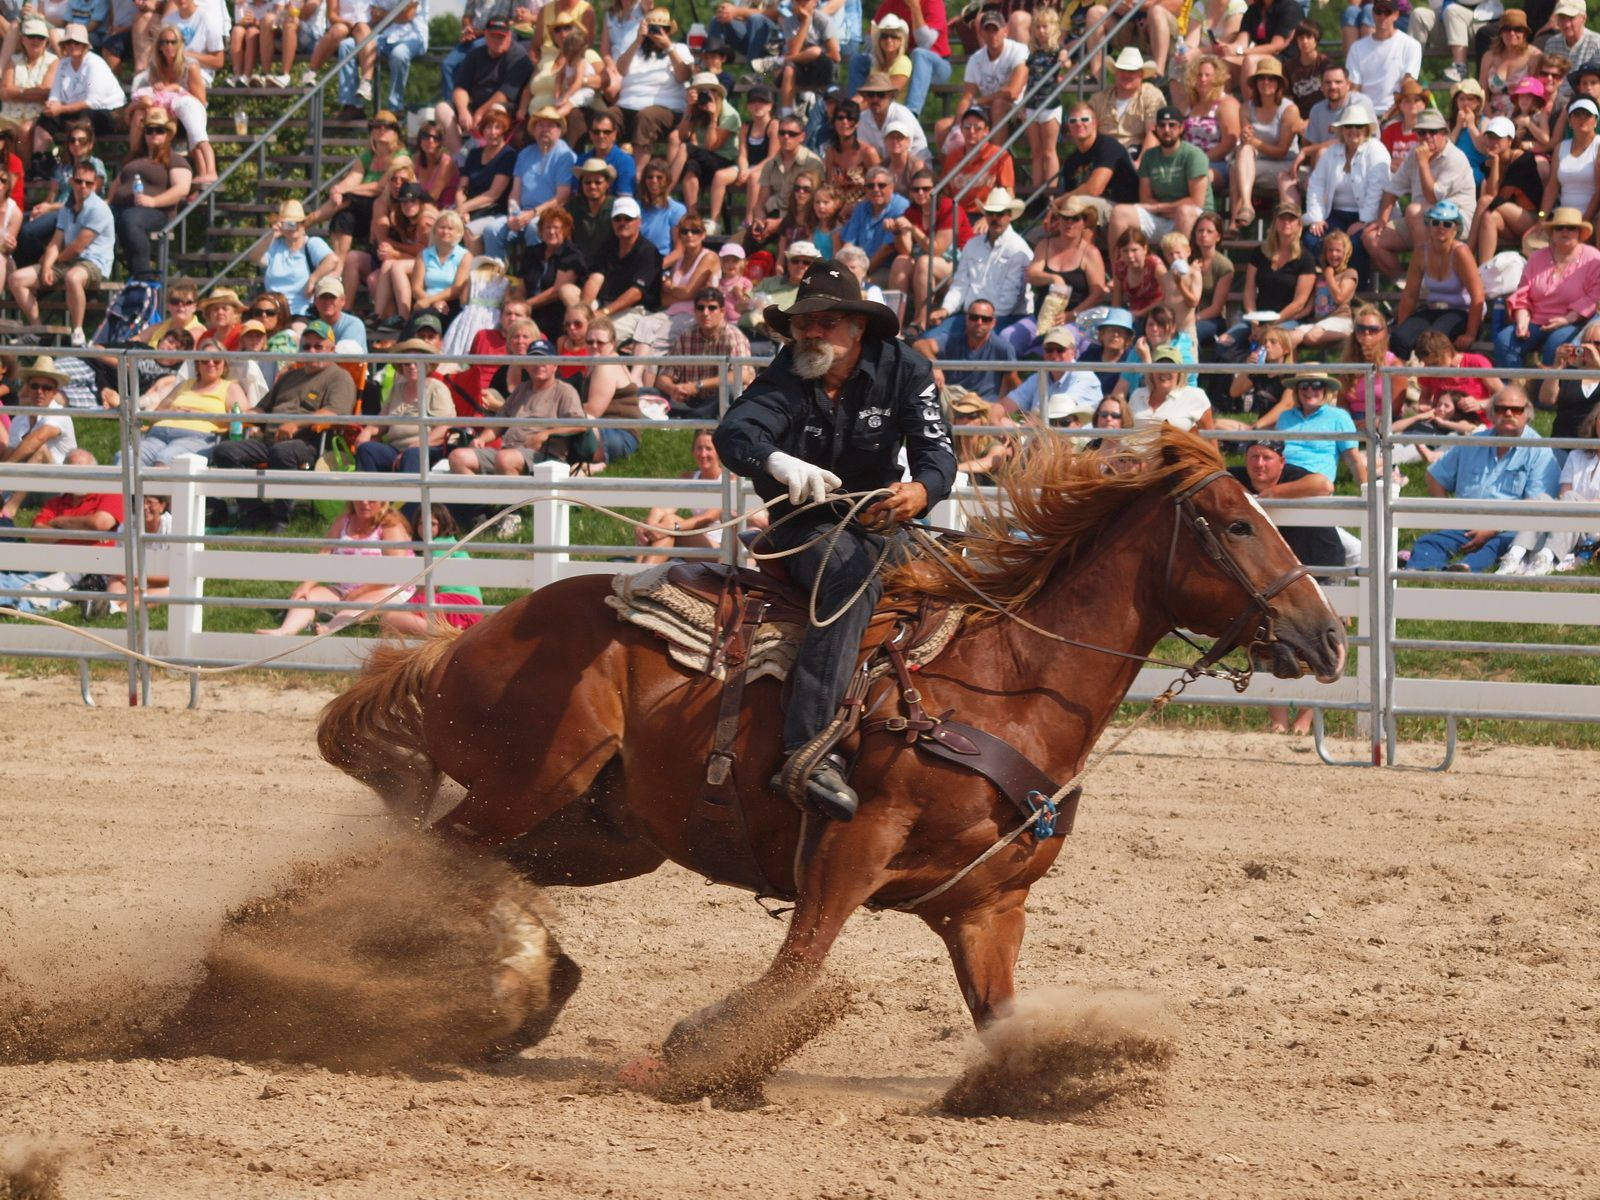 HD wallpaper cowboy riding on horse Rodeo Barrel Racing Woman Cowgirl   Wallpaper Flare